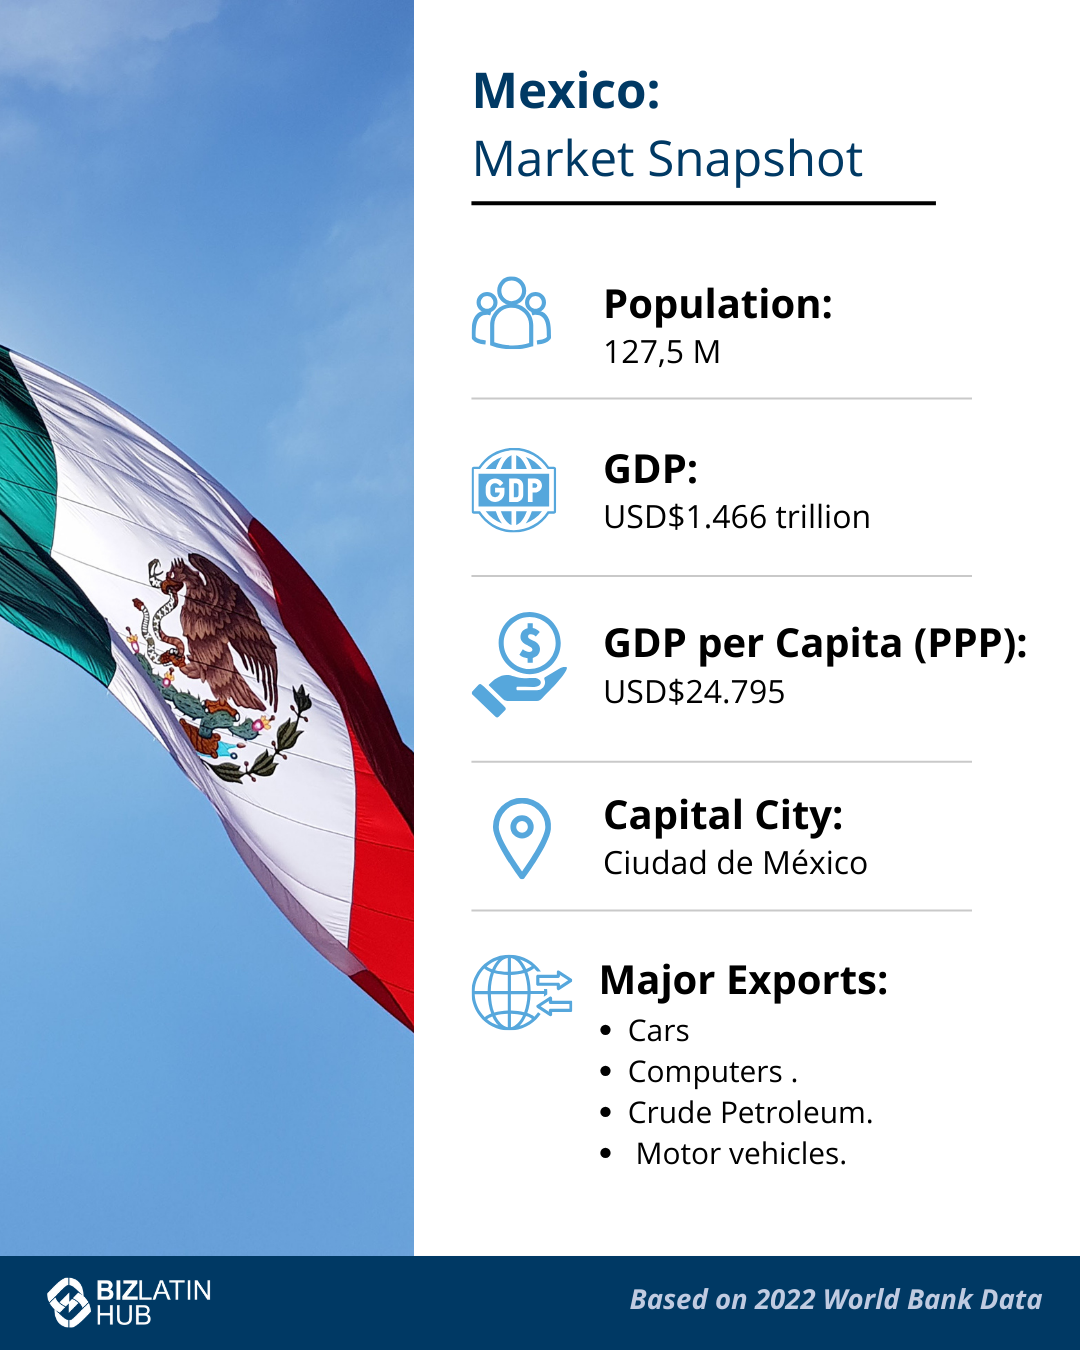 Infographic titled "Mexico: Market Snapshot." It features a Mexican flag against a blue sky and includes key statistics: 127.5M population, USD$1.466 trillion GDP, USD$24,795 GDP per capita (PPP), capital Mexico City, and major exports (cars, computers, crude petroleum). Source: 2022 World Bank Data. Bizlatin Hub logo at the bottom